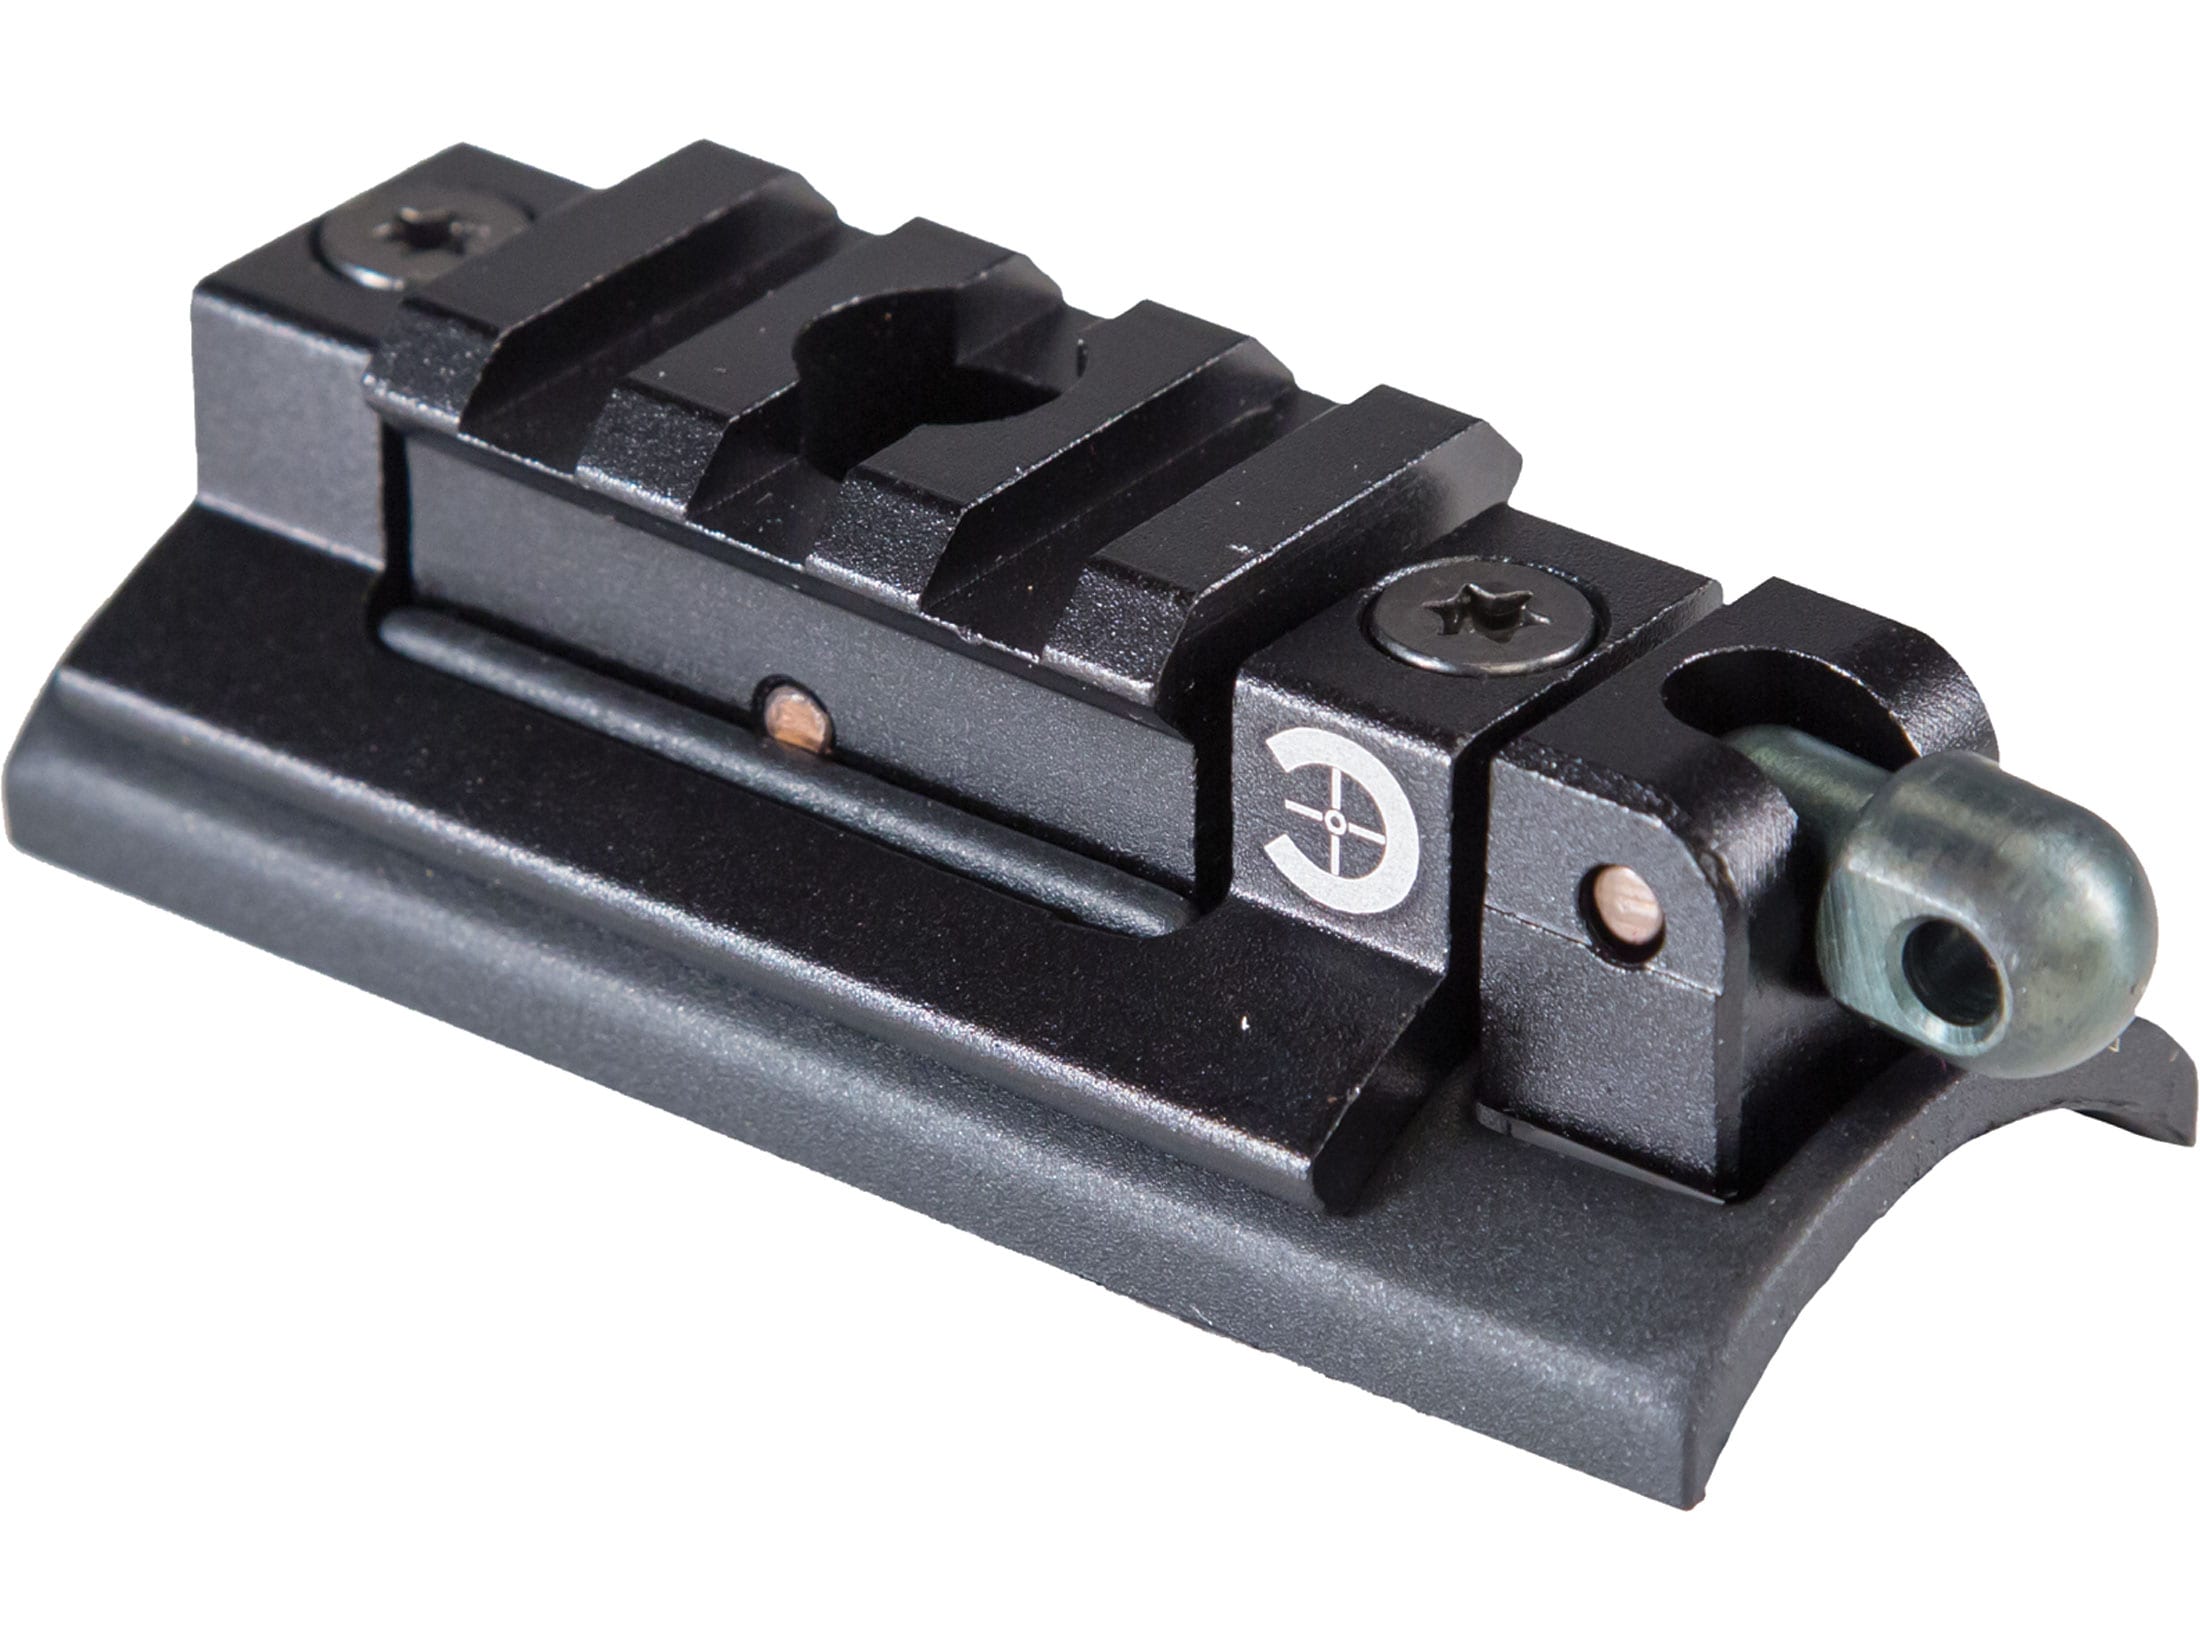 Caldwell Pic Rail Adapter Plate For Sale